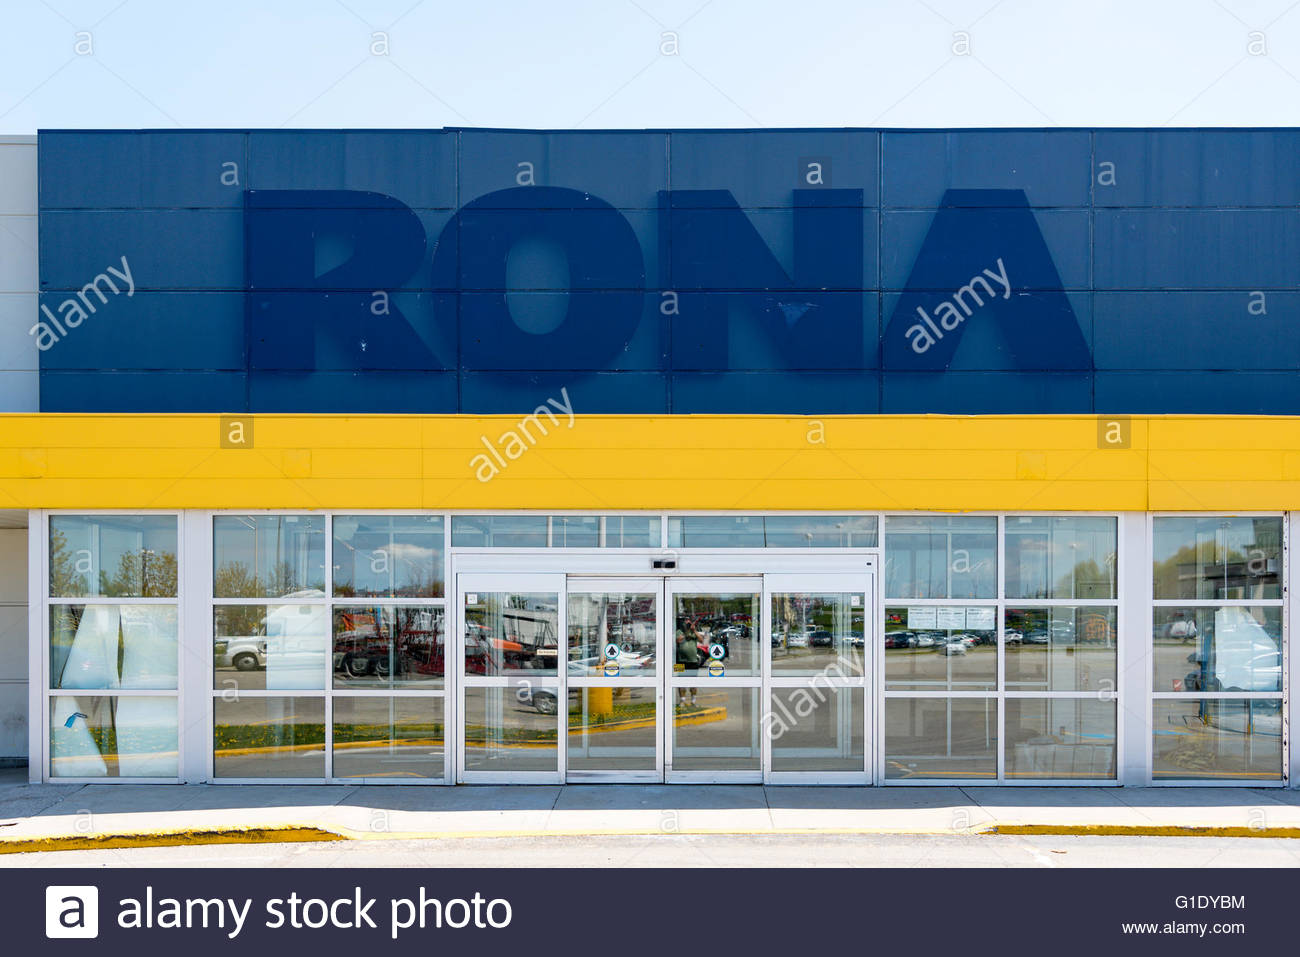 Abandoned Rona Home And Garden Store The Canadian Company Has